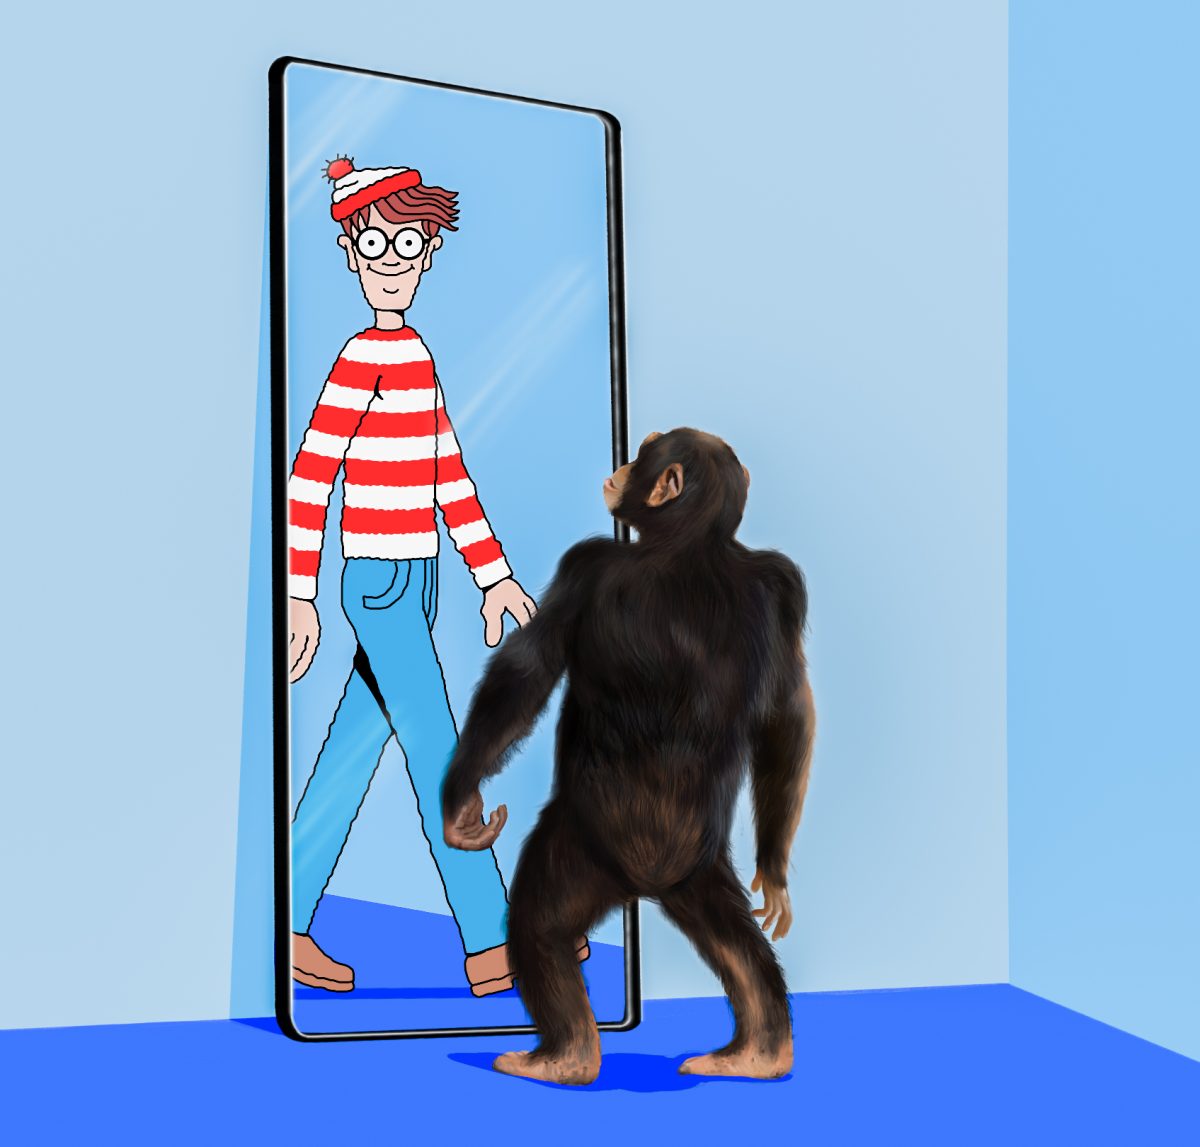 A+chimp+stares+into+a+mirror+and+sees+a+reflection+of+Waldo.+Illustration+by+Bianca+Oppedisano+%2F+Mass+Media+Staff.